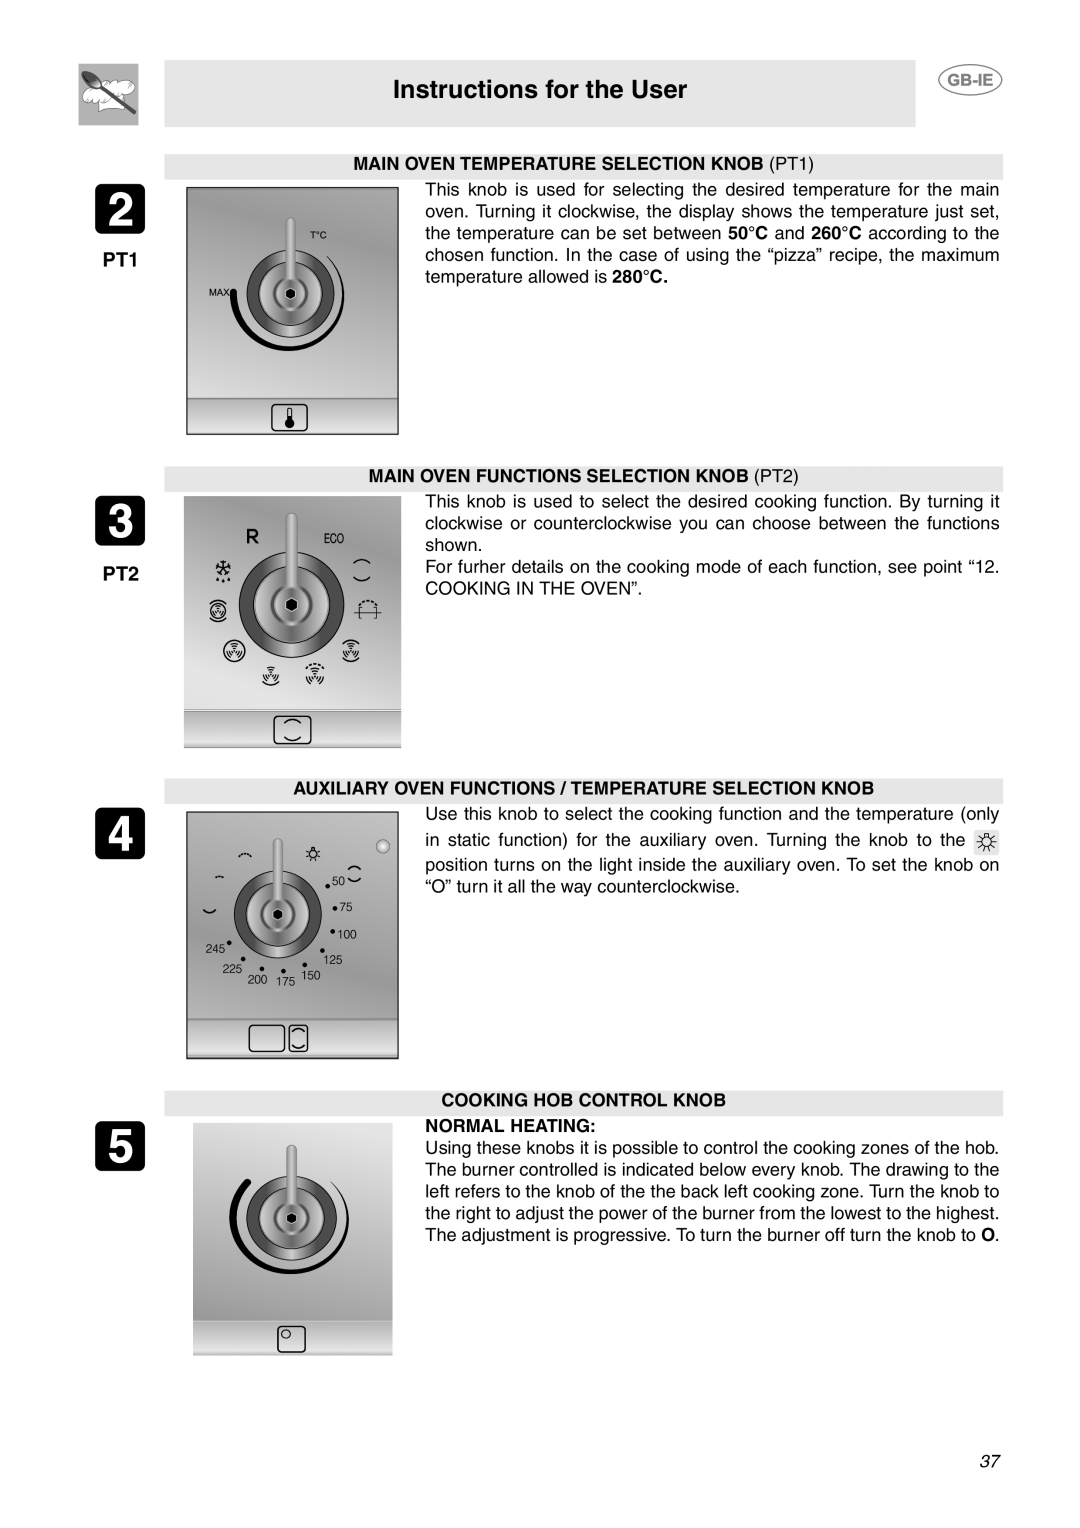 Smeg CE92CMX manual Instructions for the User, PT1 PT2, MAIN OVEN TEMPERATURE SELECTION KNOB PT1 